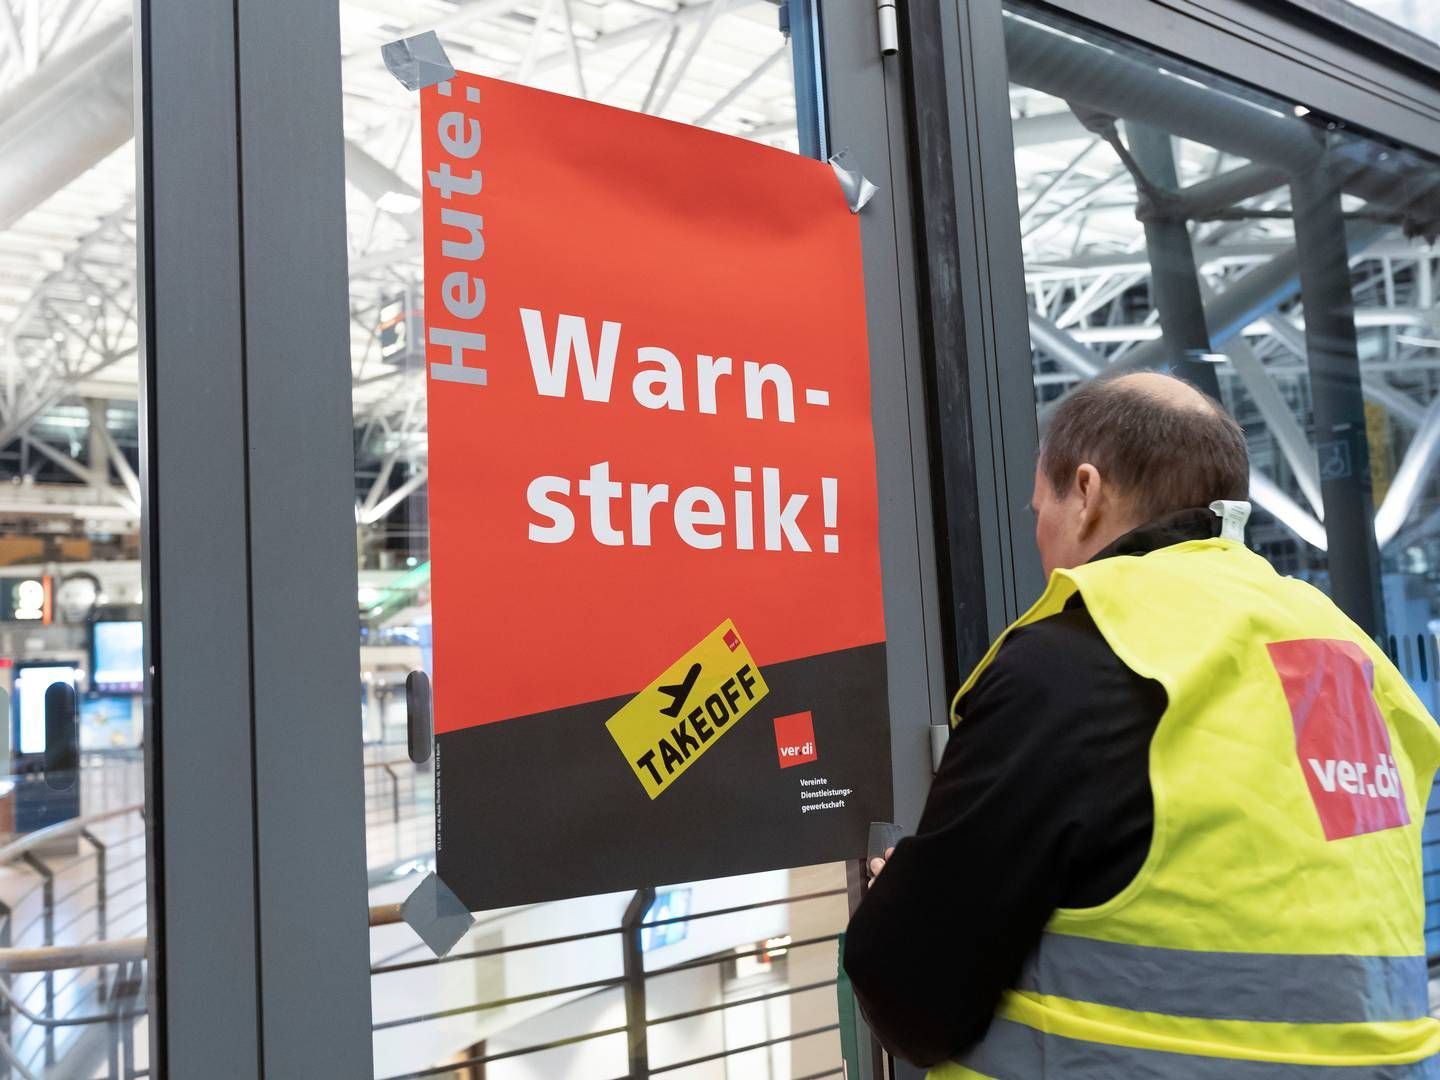 Strikes have repeatedly paralyzed Germany's transport sector. Here it is the airport in Hamburg in March. | Photo: Bodo Marks/AP/Ritzau Scanpix